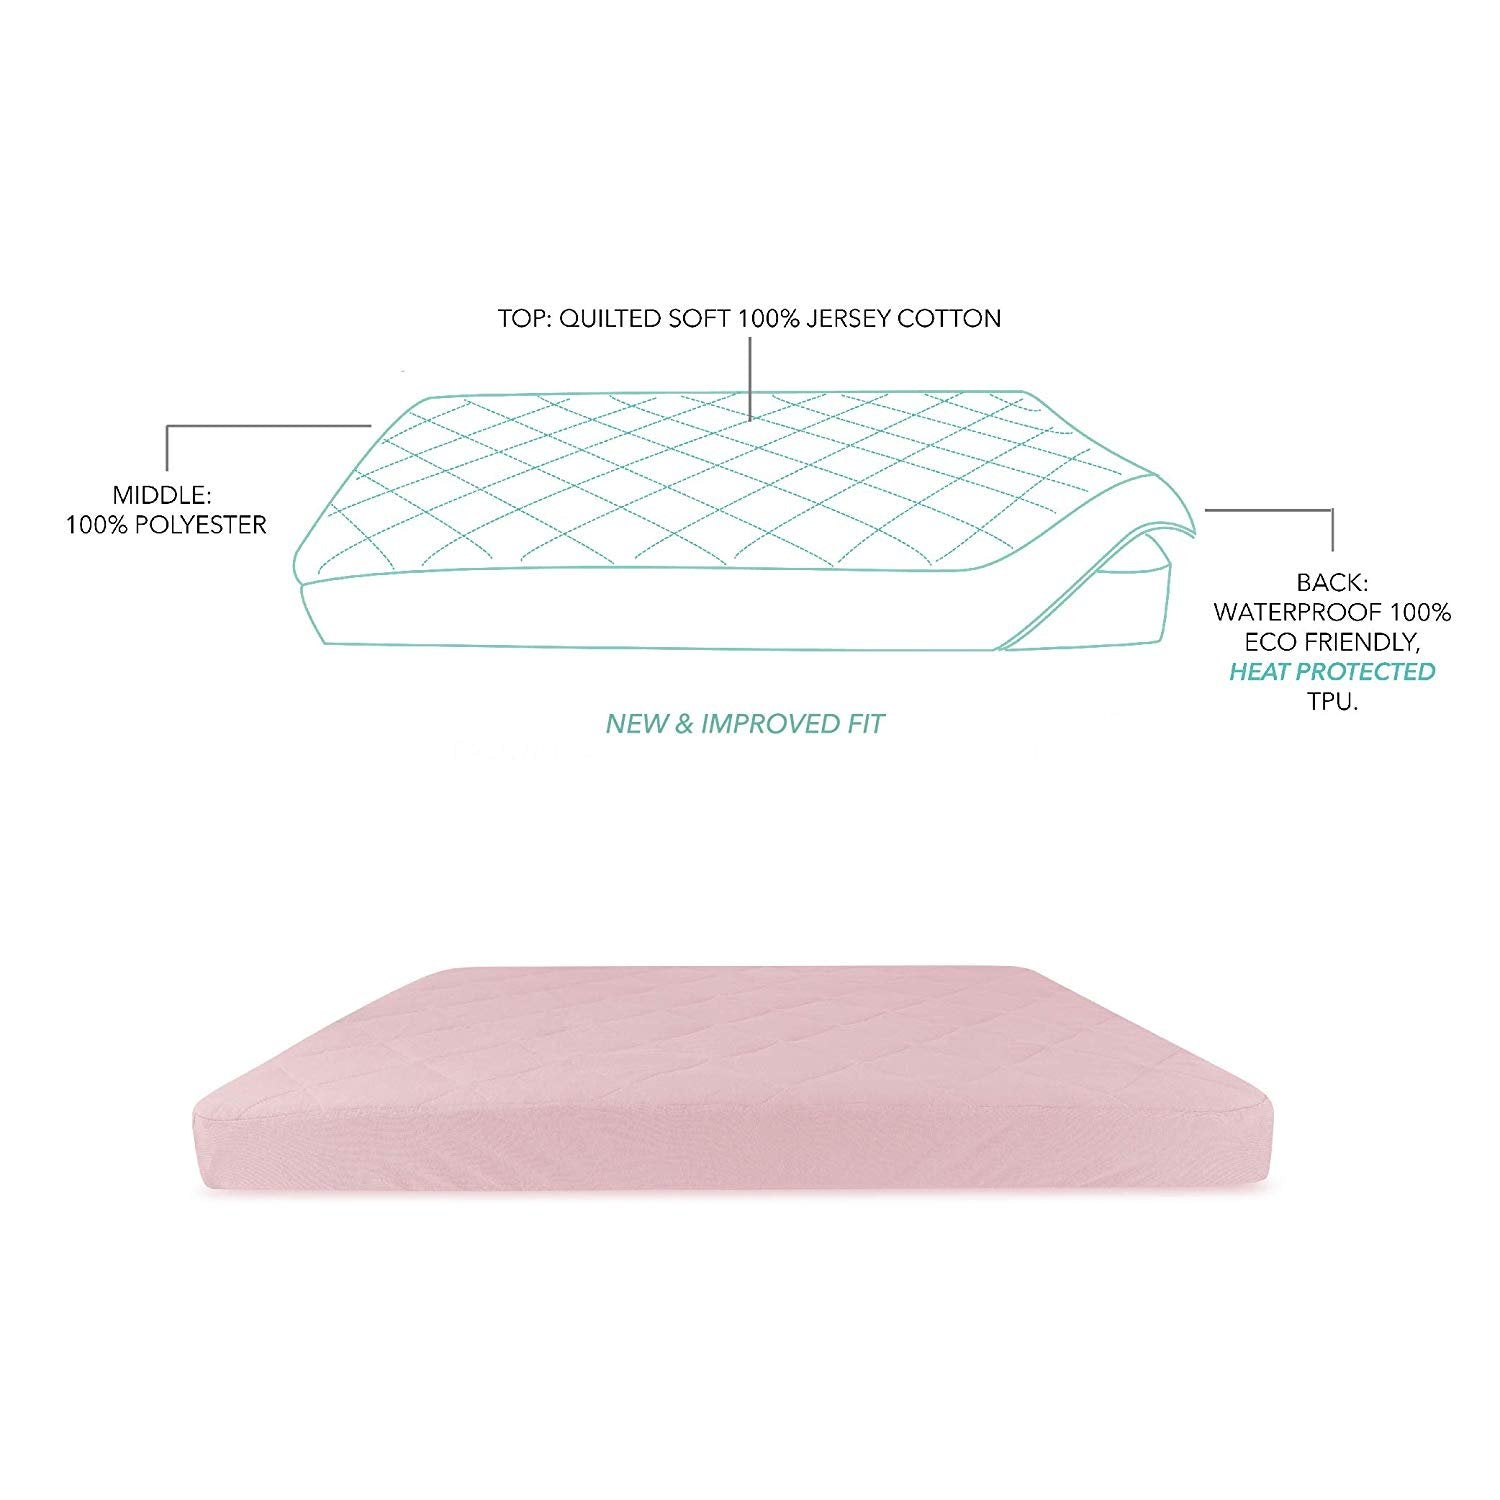 Quilted Waterproof Bassinet Sheet with Heat Protection